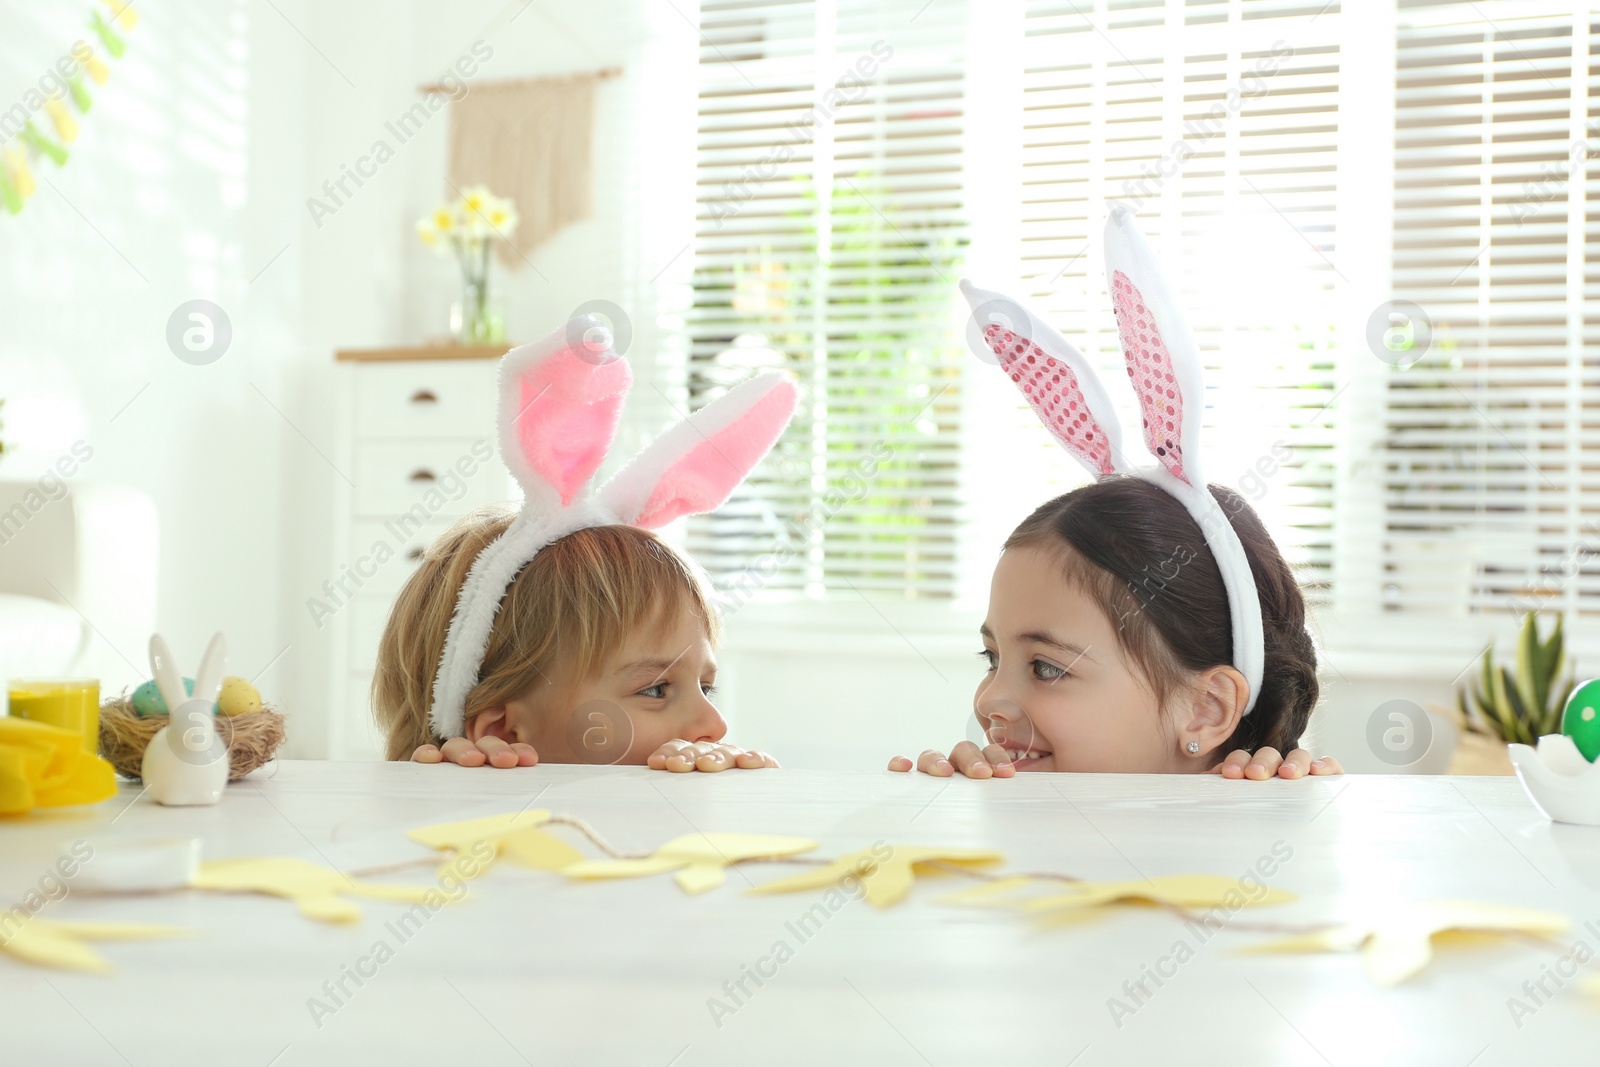 Photo of Cute children wearing bunny ears headbands at table with Easter eggs, indoors